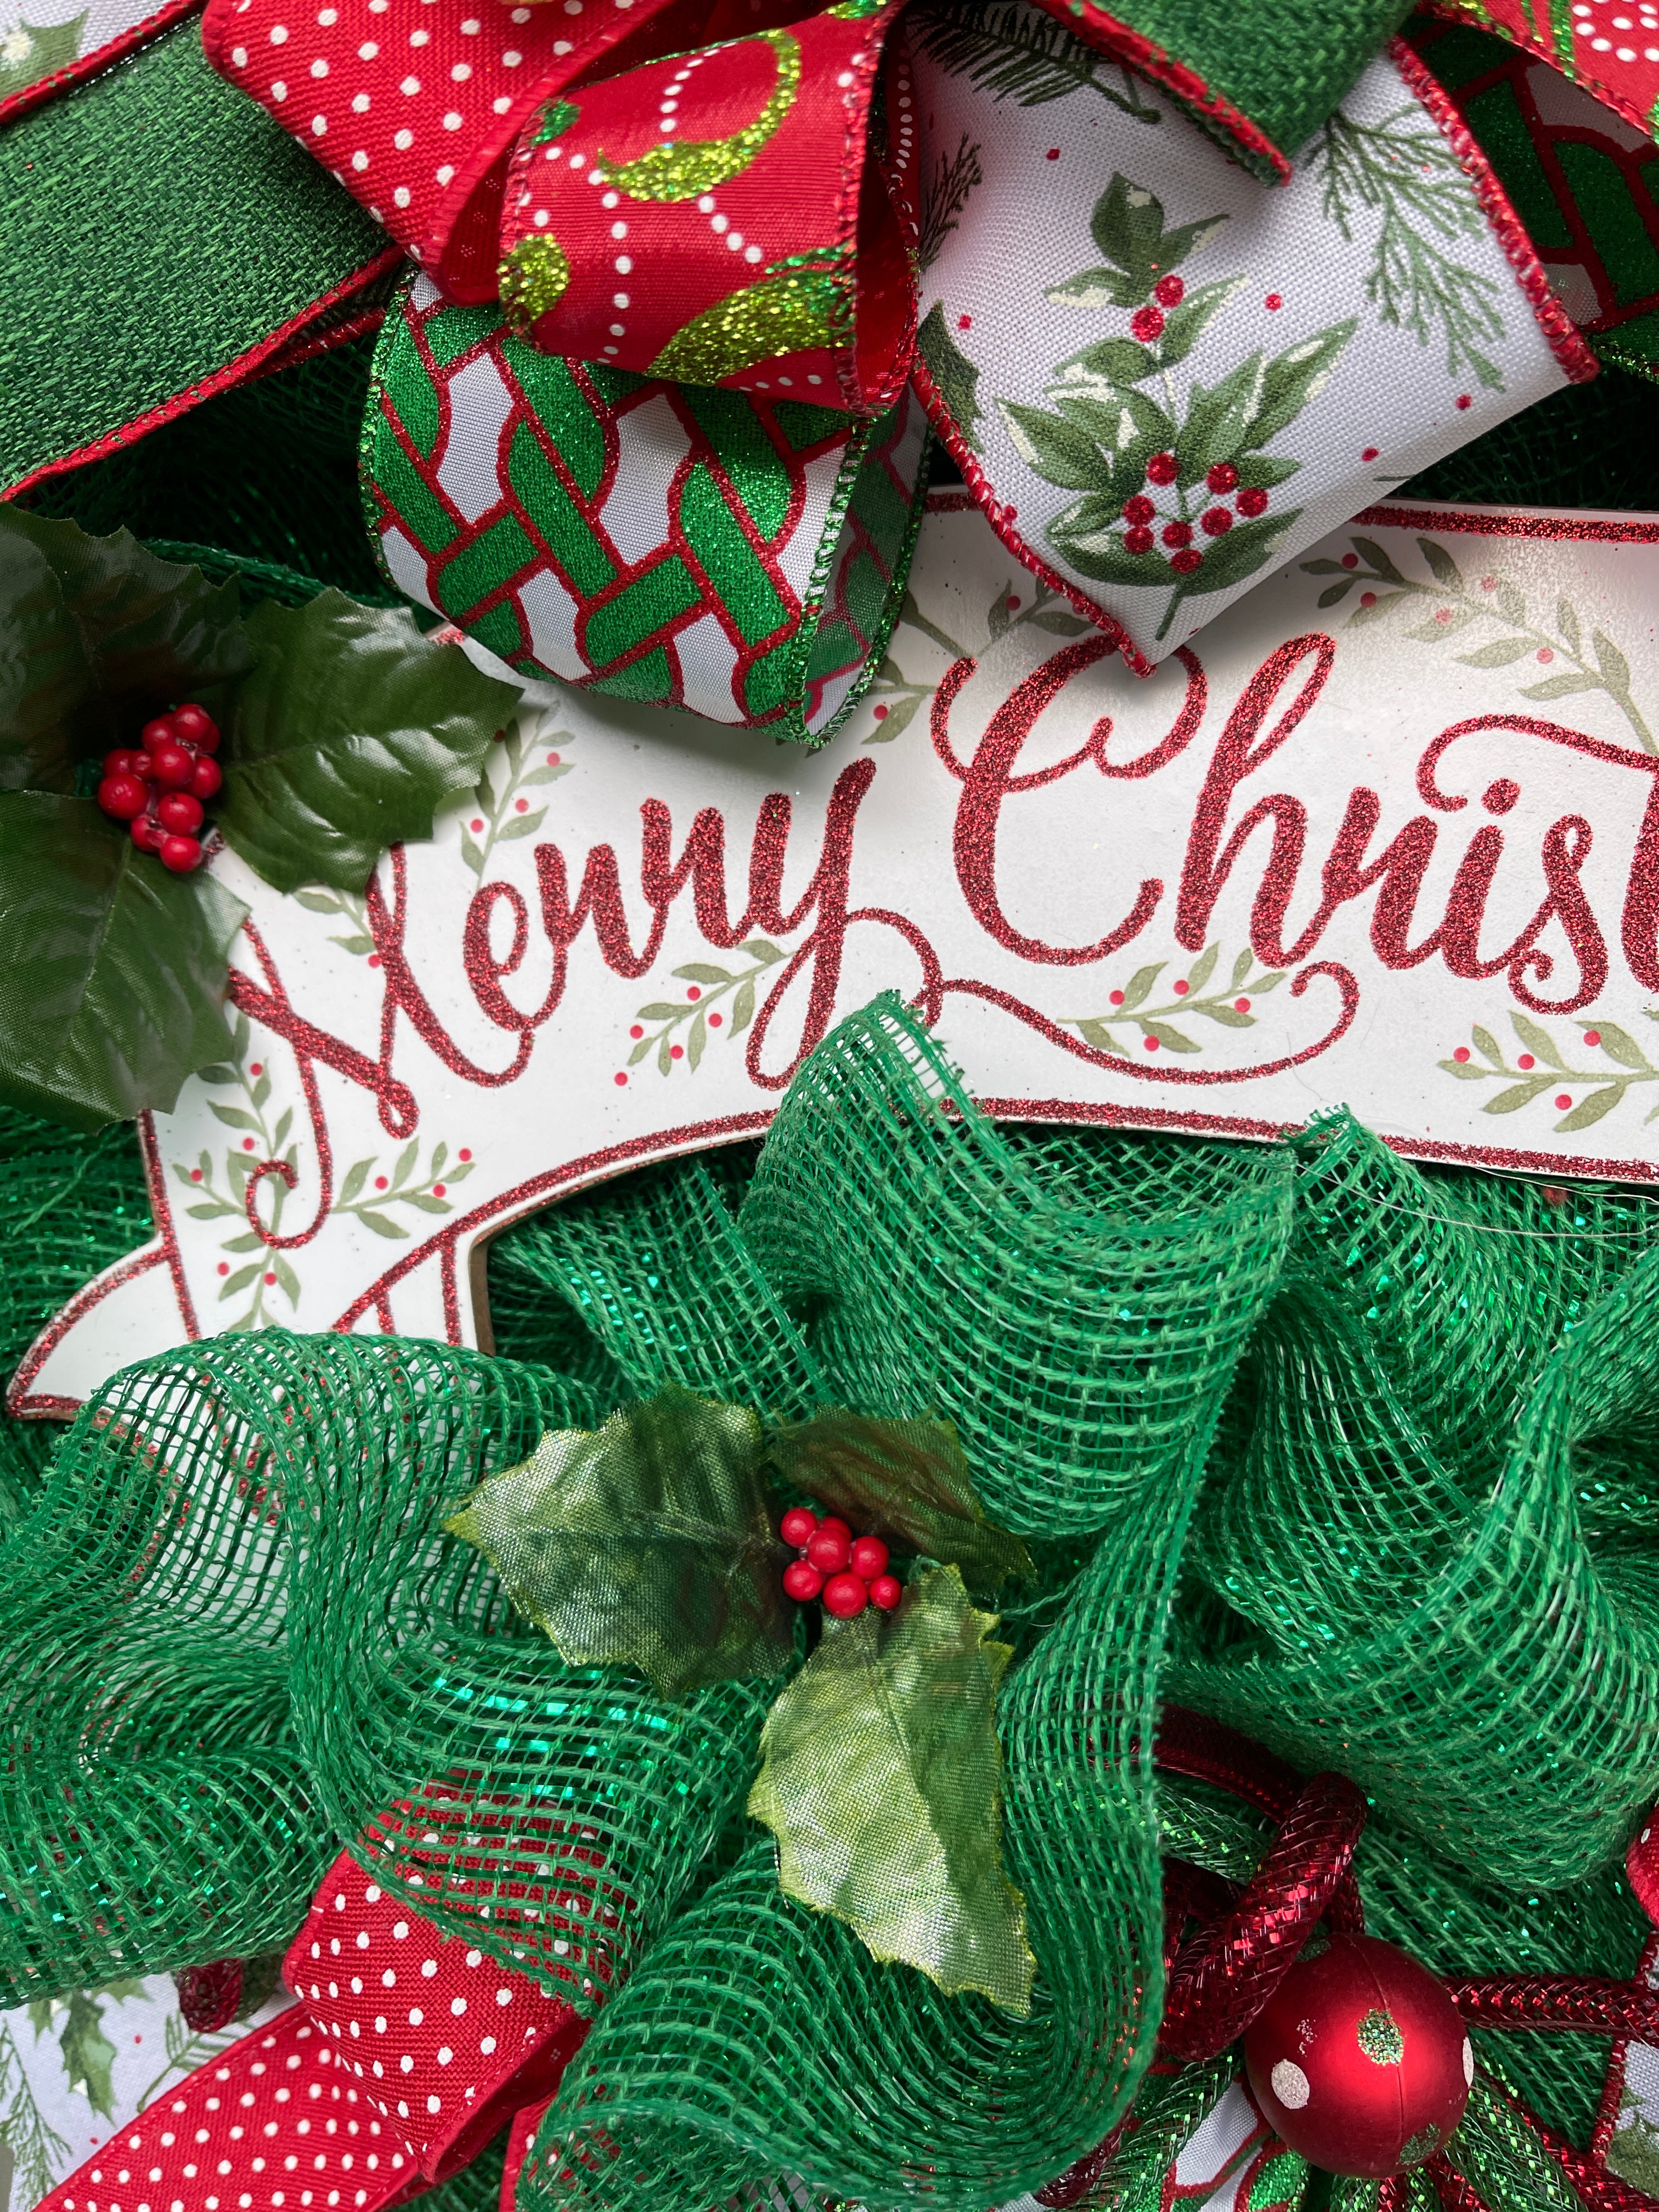 Close Up Detail of Red Words of Merry Christmas on White Banner sign with painted mistletoe branches, sprigs of artificial mistletoe and green fabric mesh